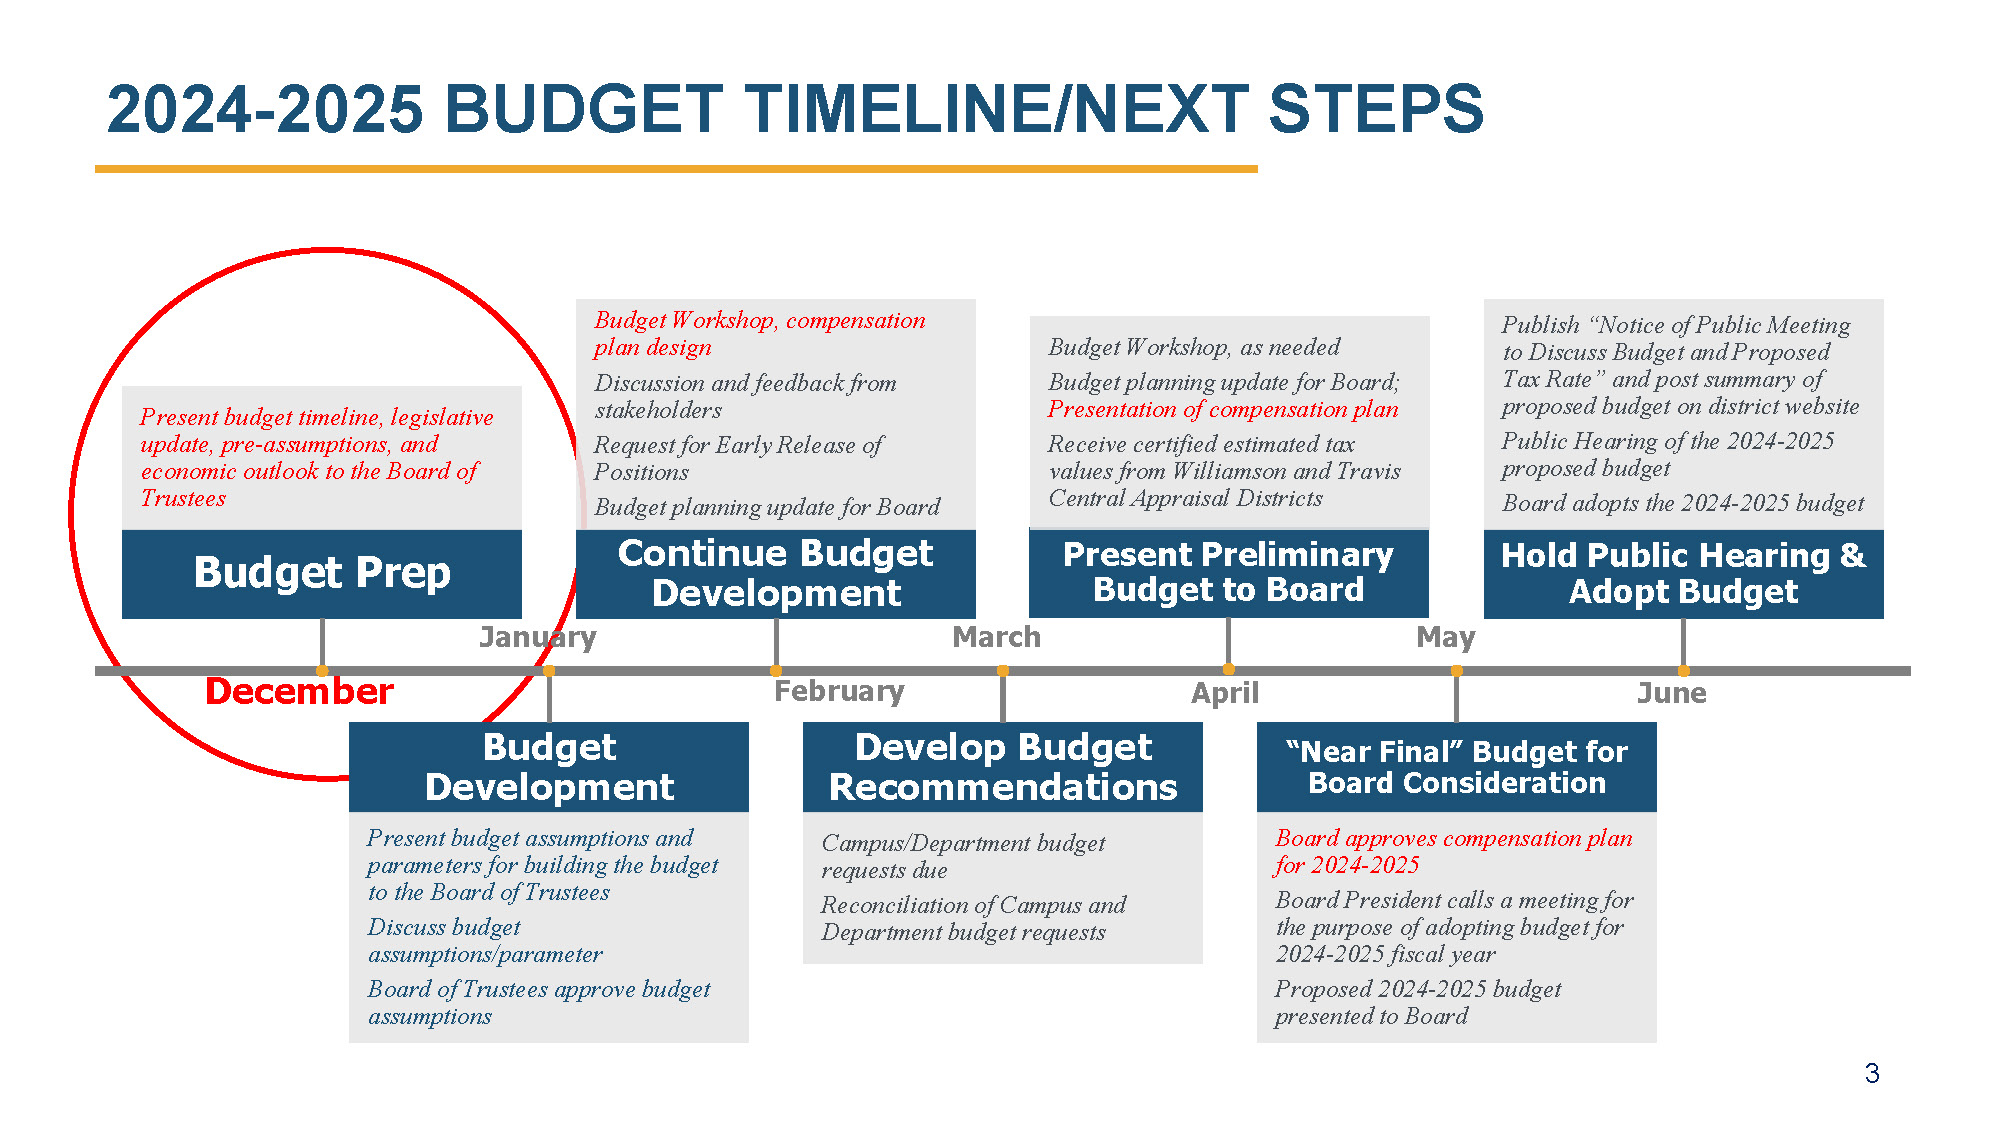 OMB - Budget Development and Planning